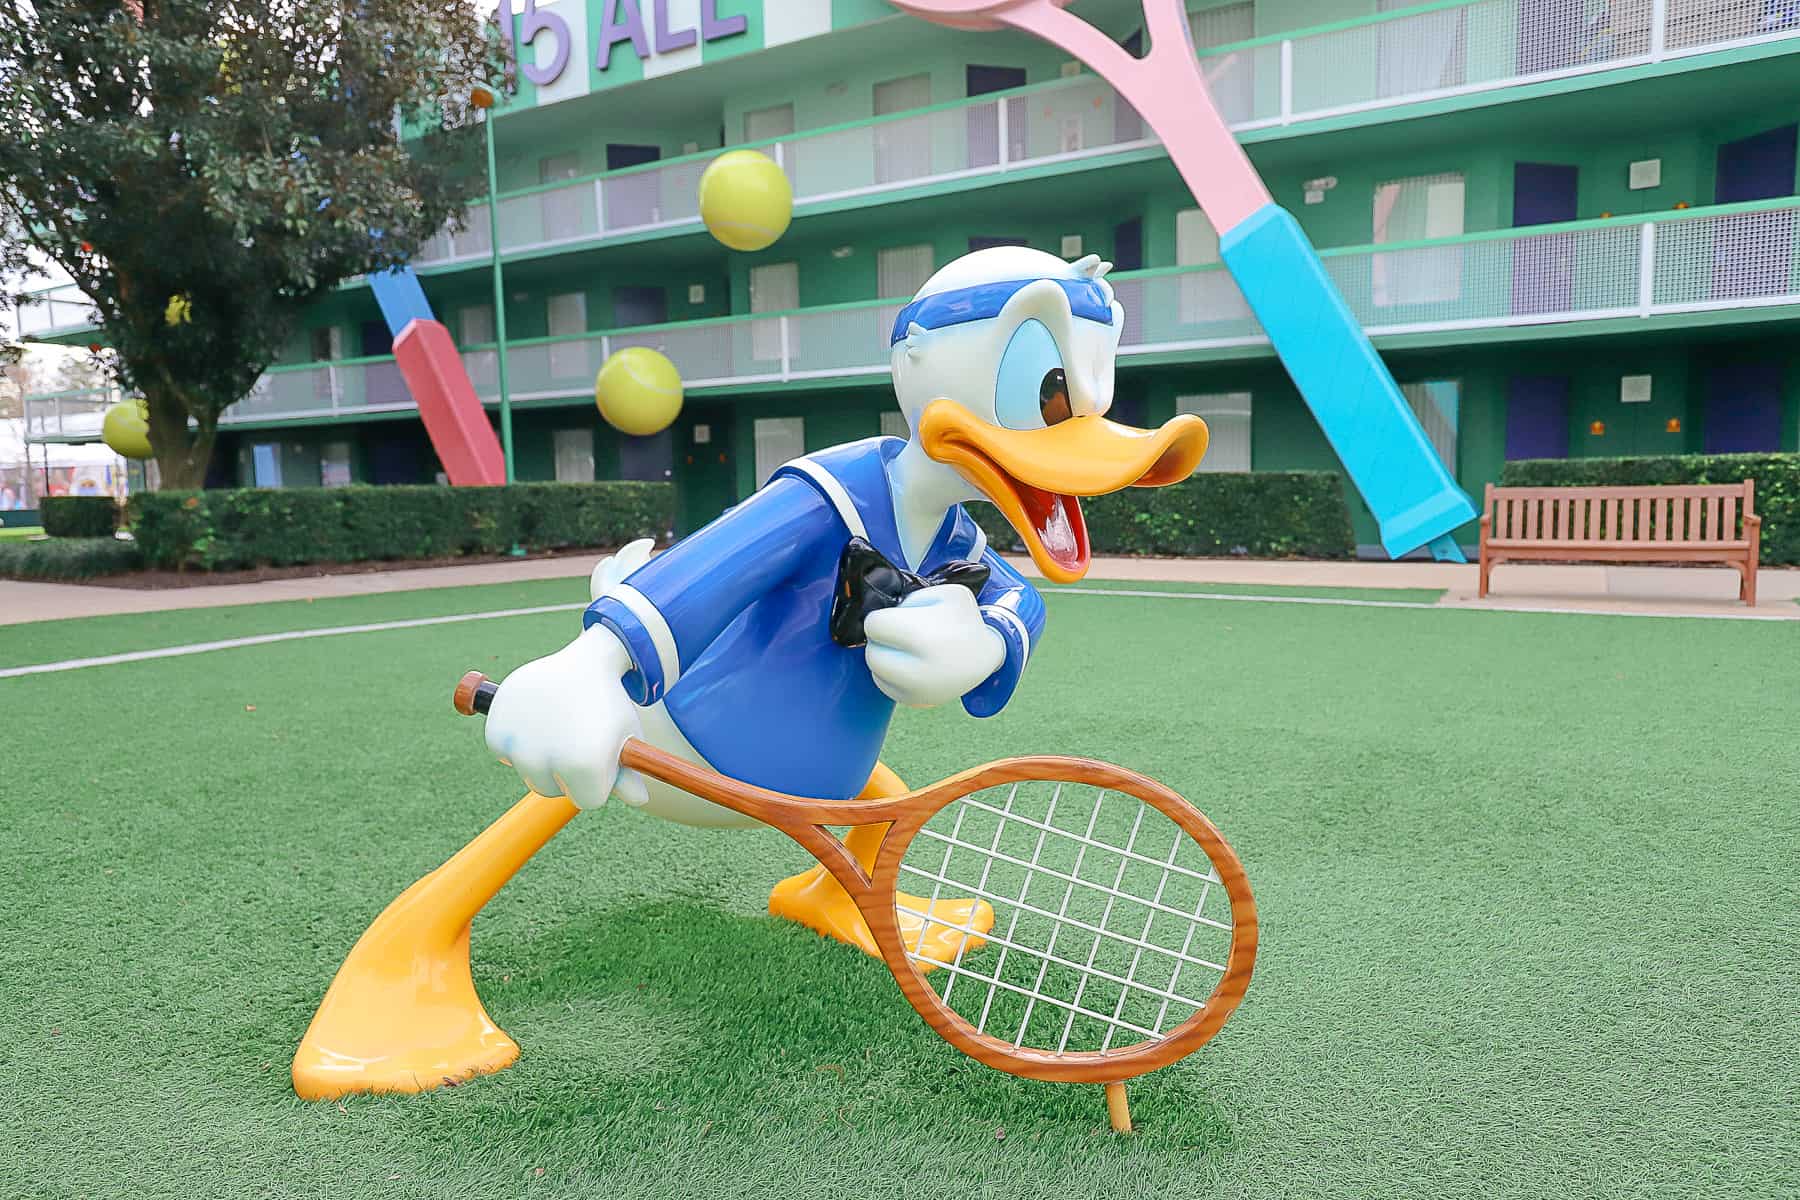 Donald Duck on center court with a tennis racket at All-Star Sports 